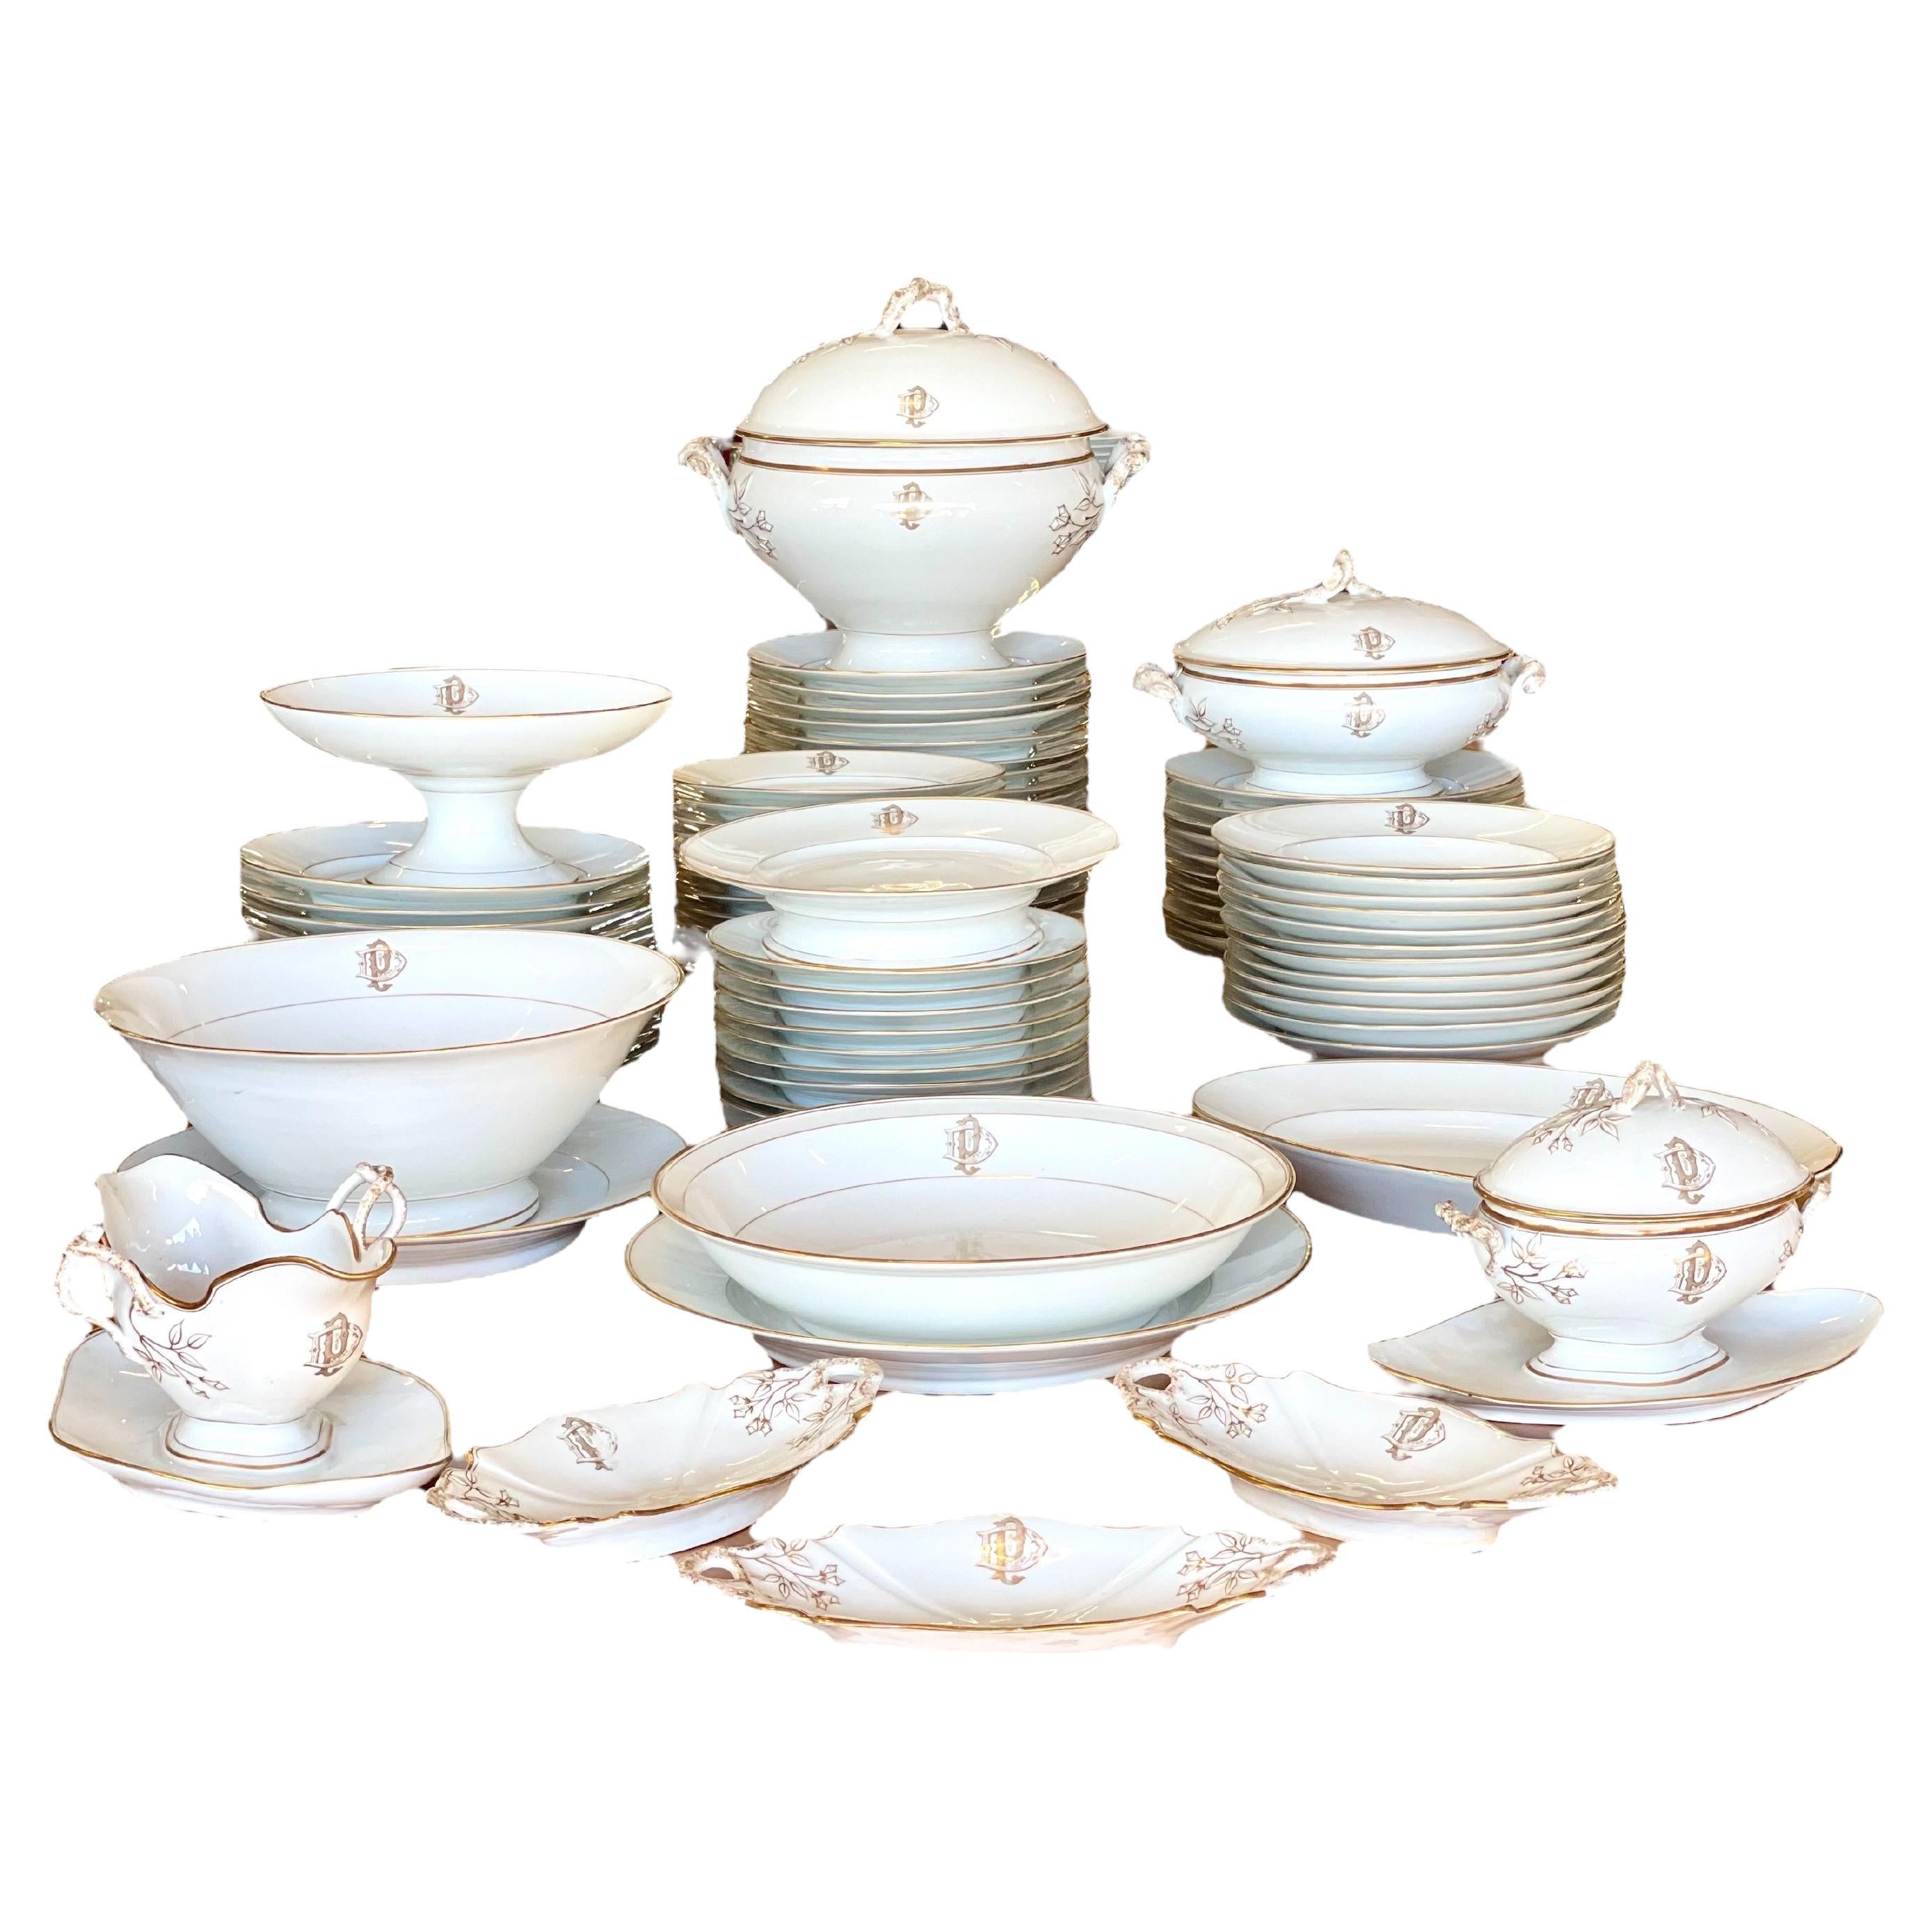 Limoges Porcelain Set of 50 Piece Dinner Service with Gilt Edges and Monogramme For Sale